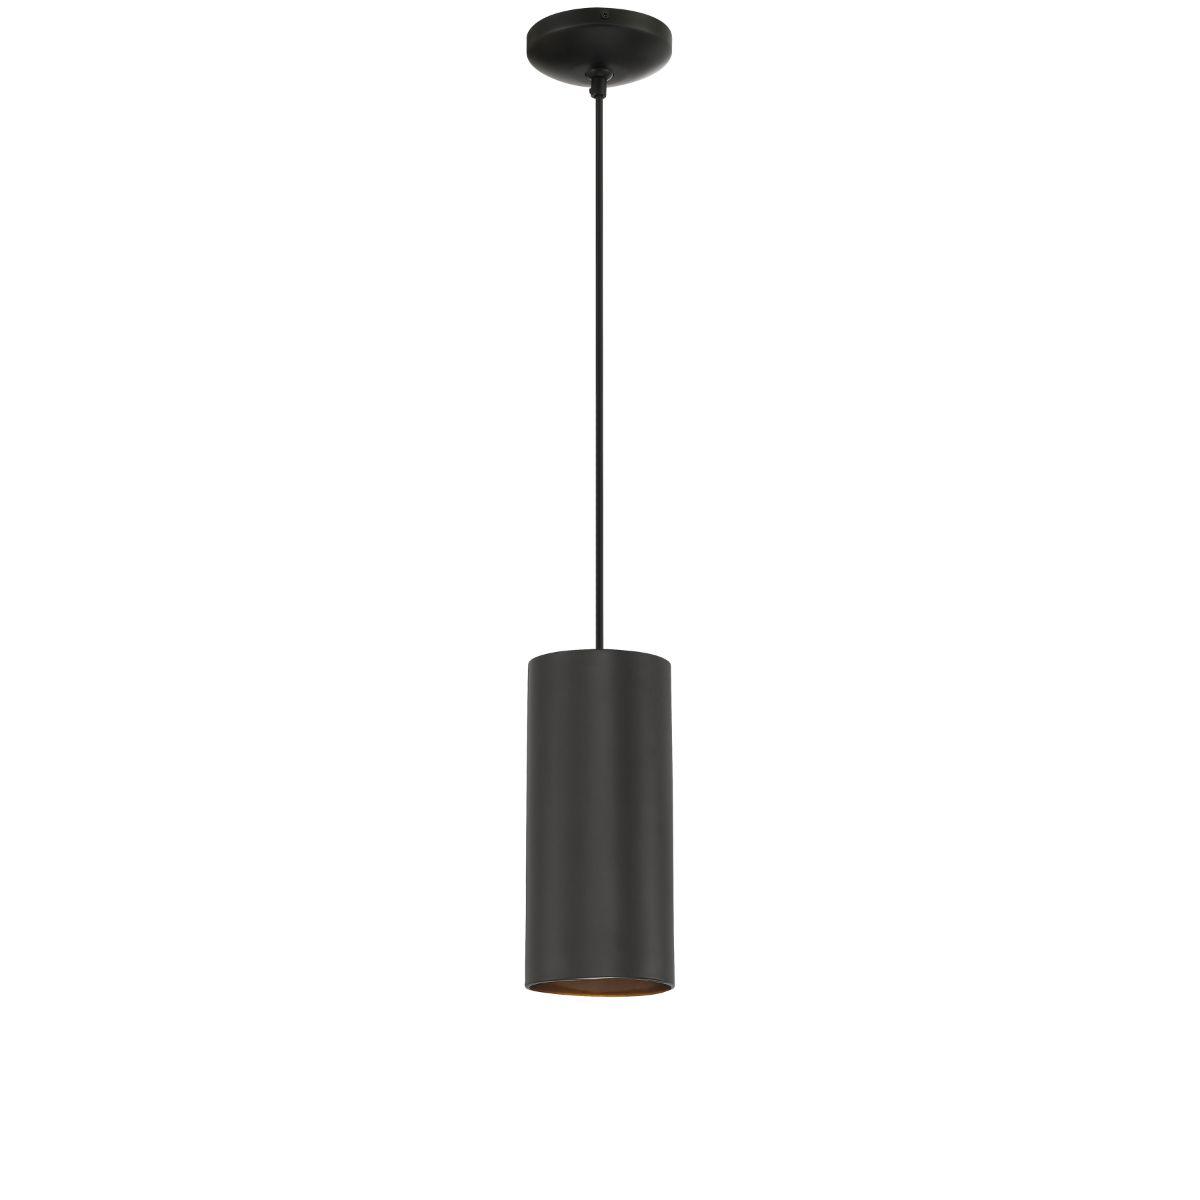 Pilson XL 11 in. LED Pendant Light with Cord